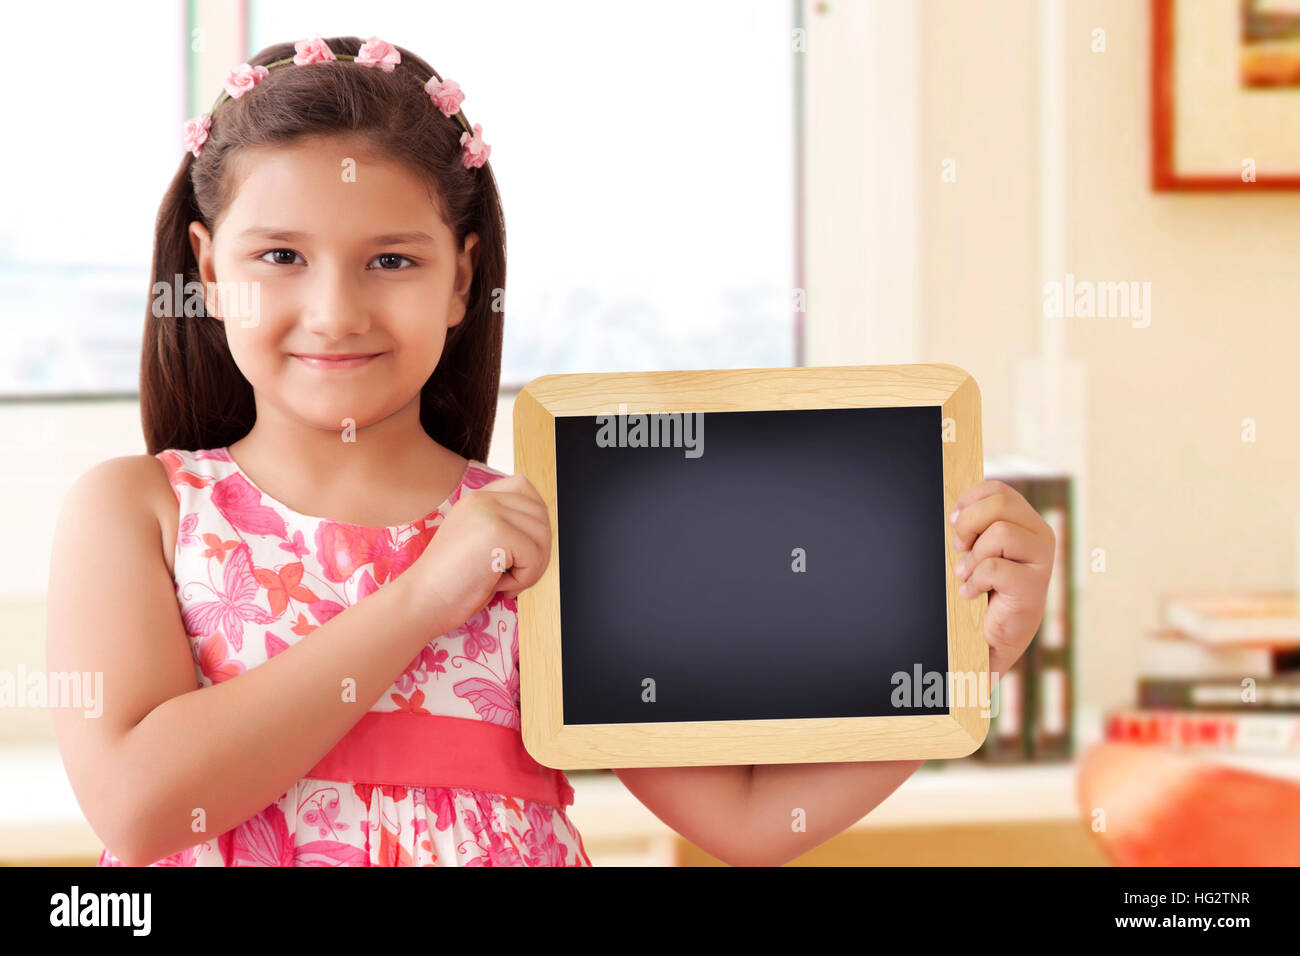 Girl smiling and holding slate Banque D'Images